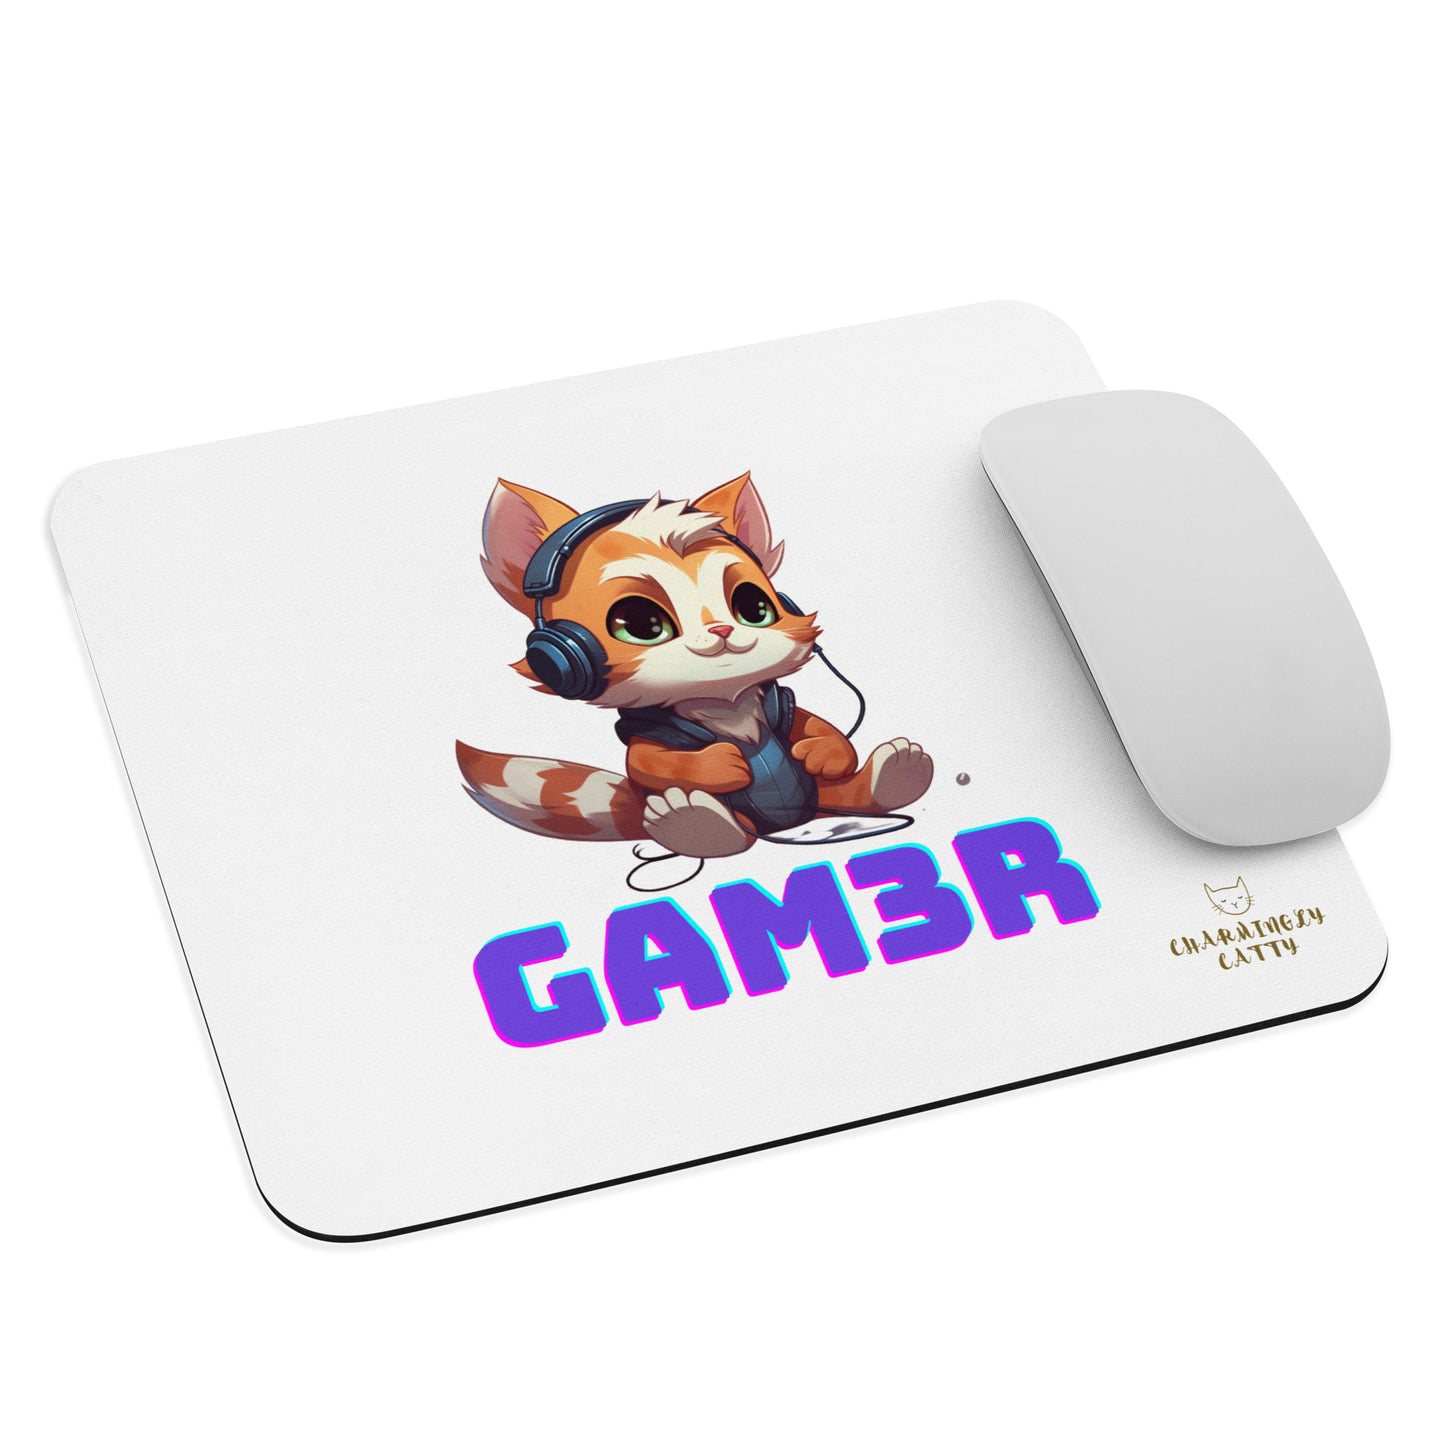 GAM3R mouse pad